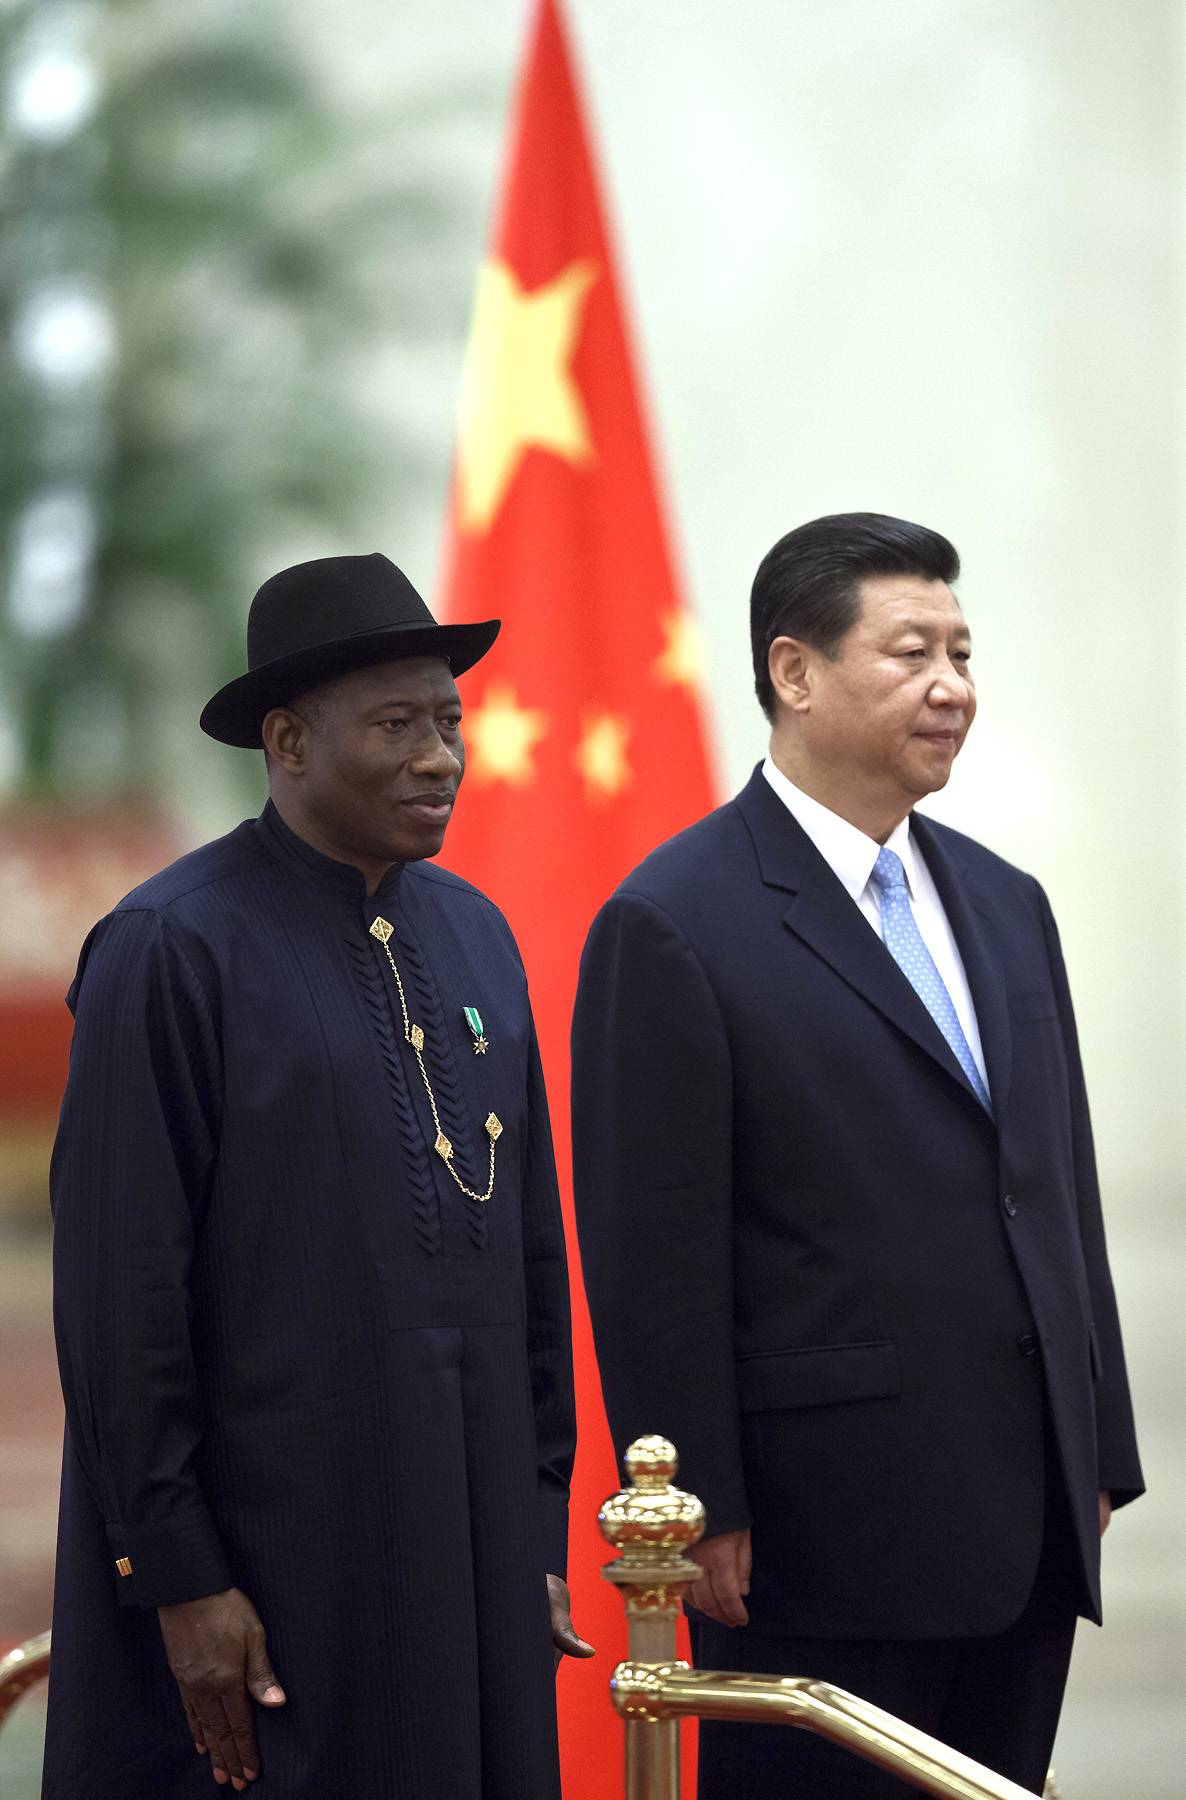 China and Africa’s Billion-Dollar Deal